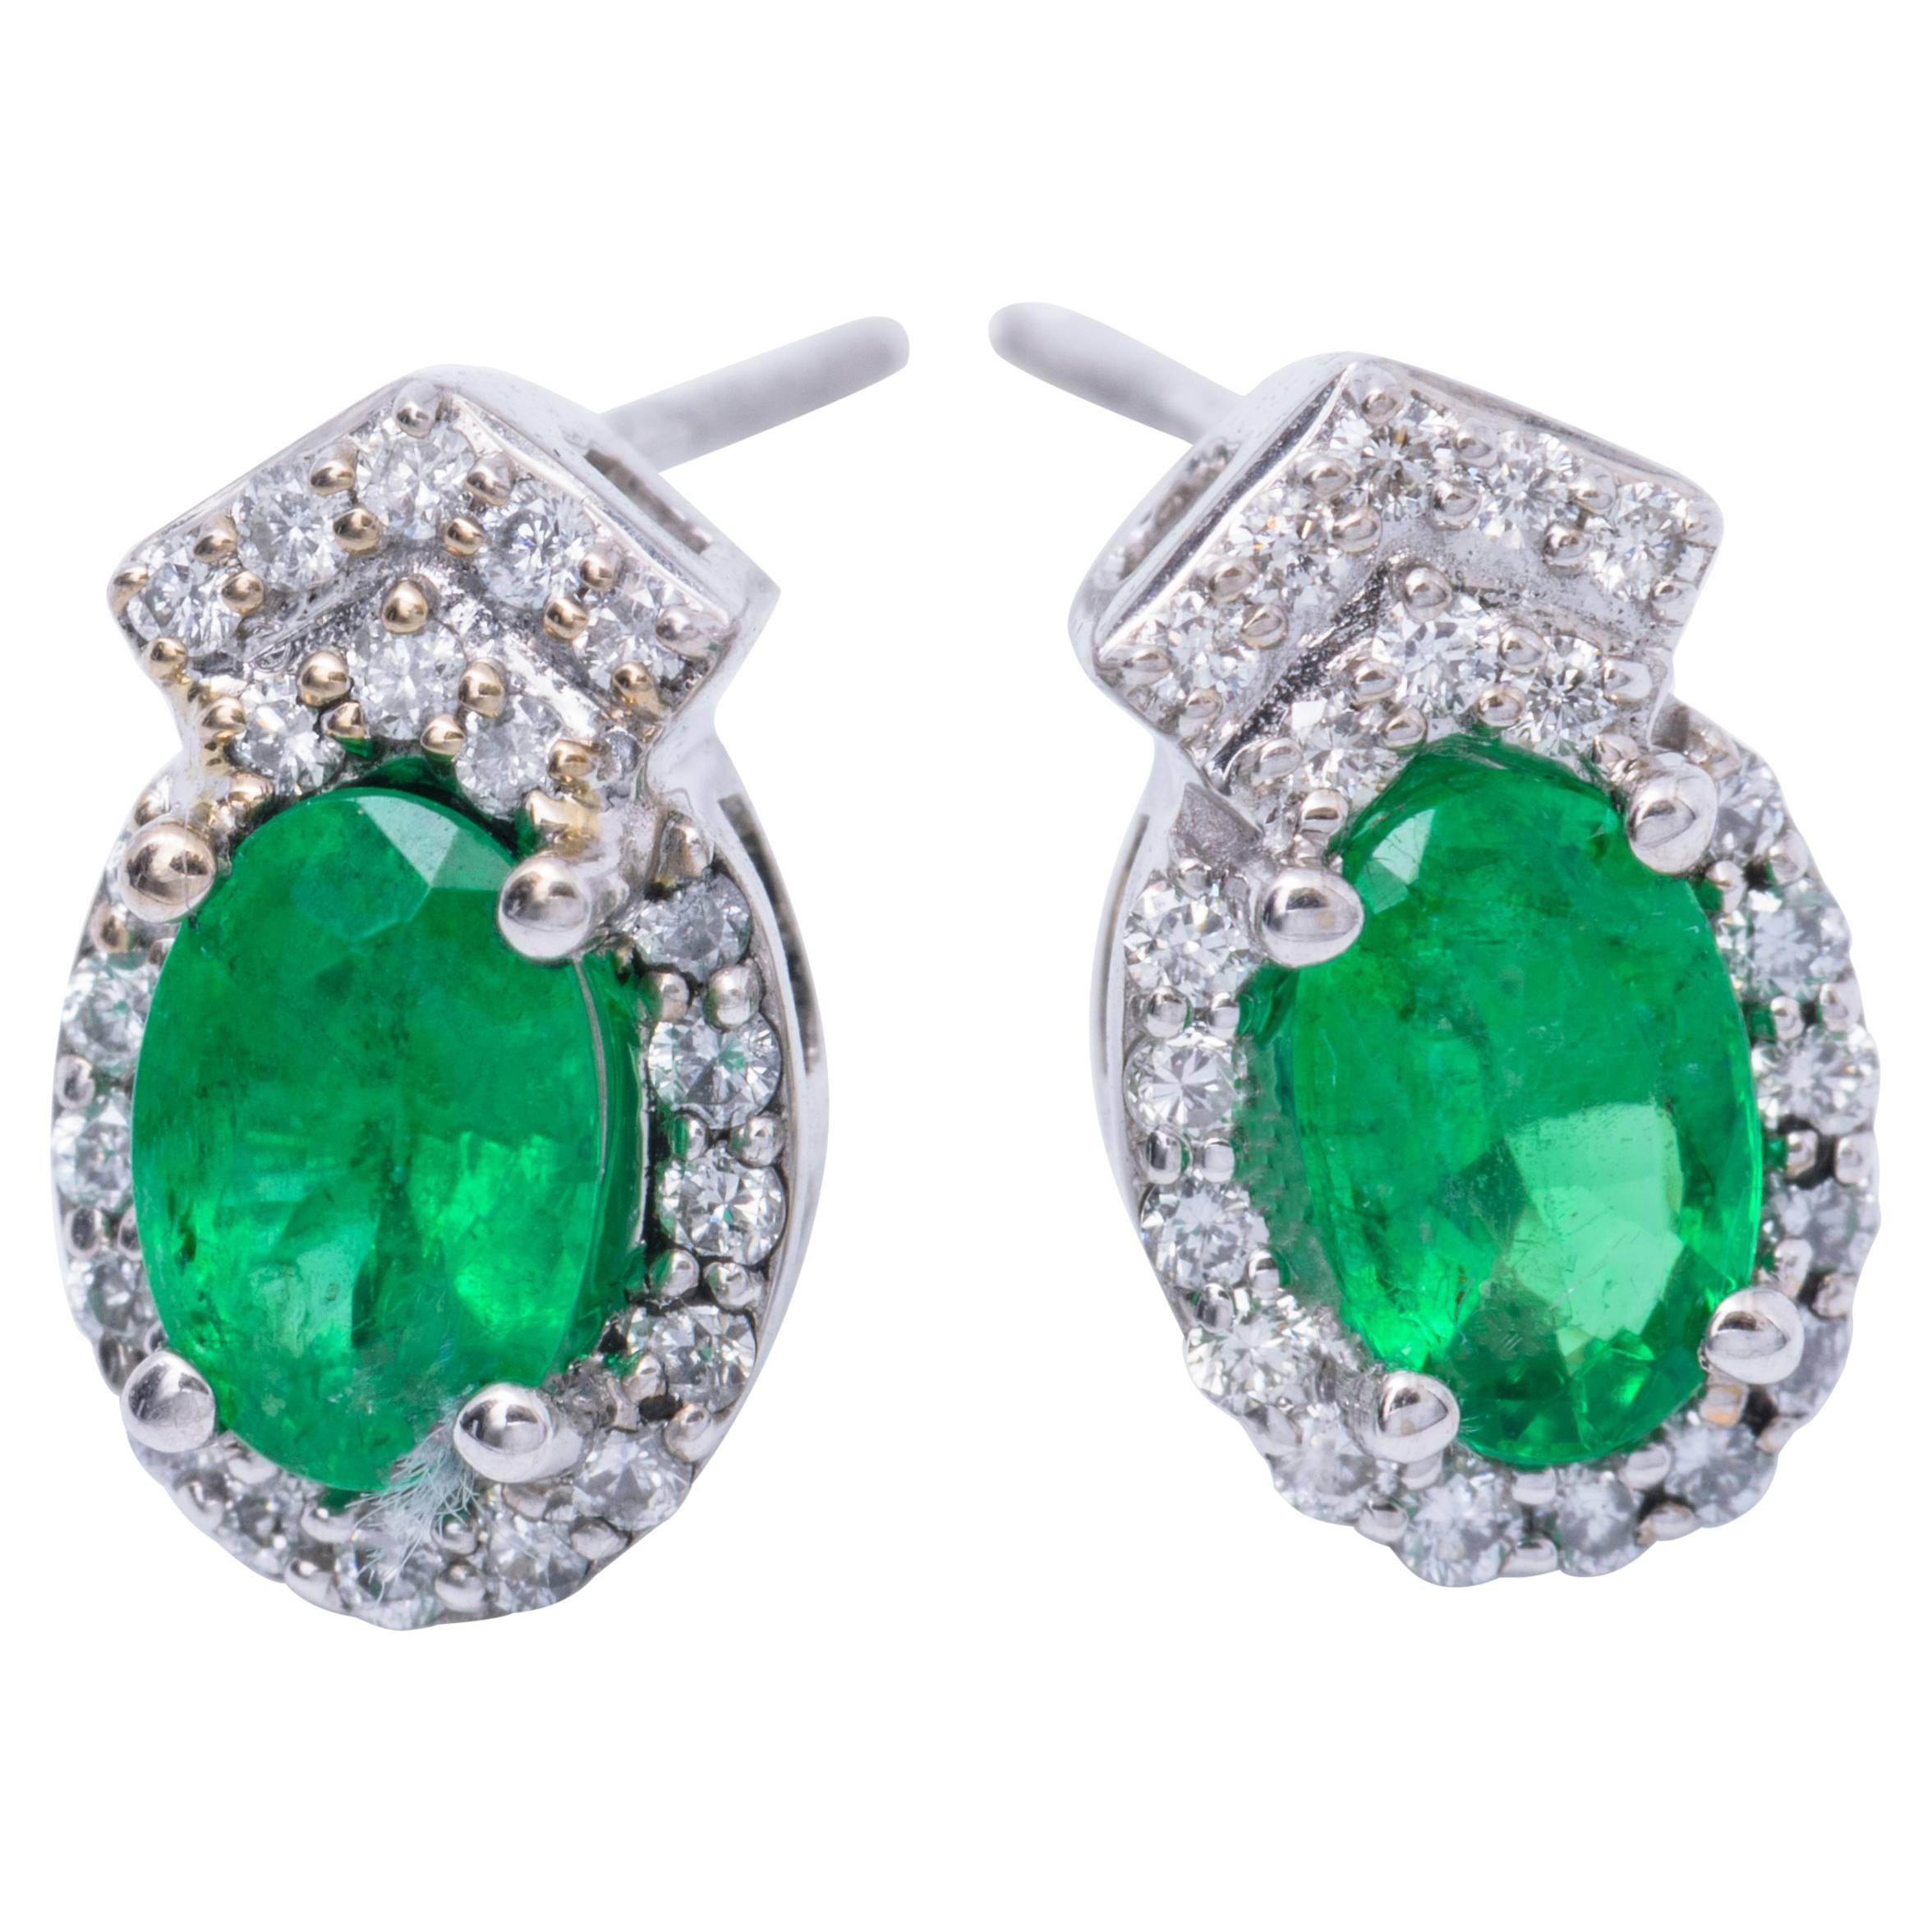 Emerald and Diamond White Gold Drop Earring Studs